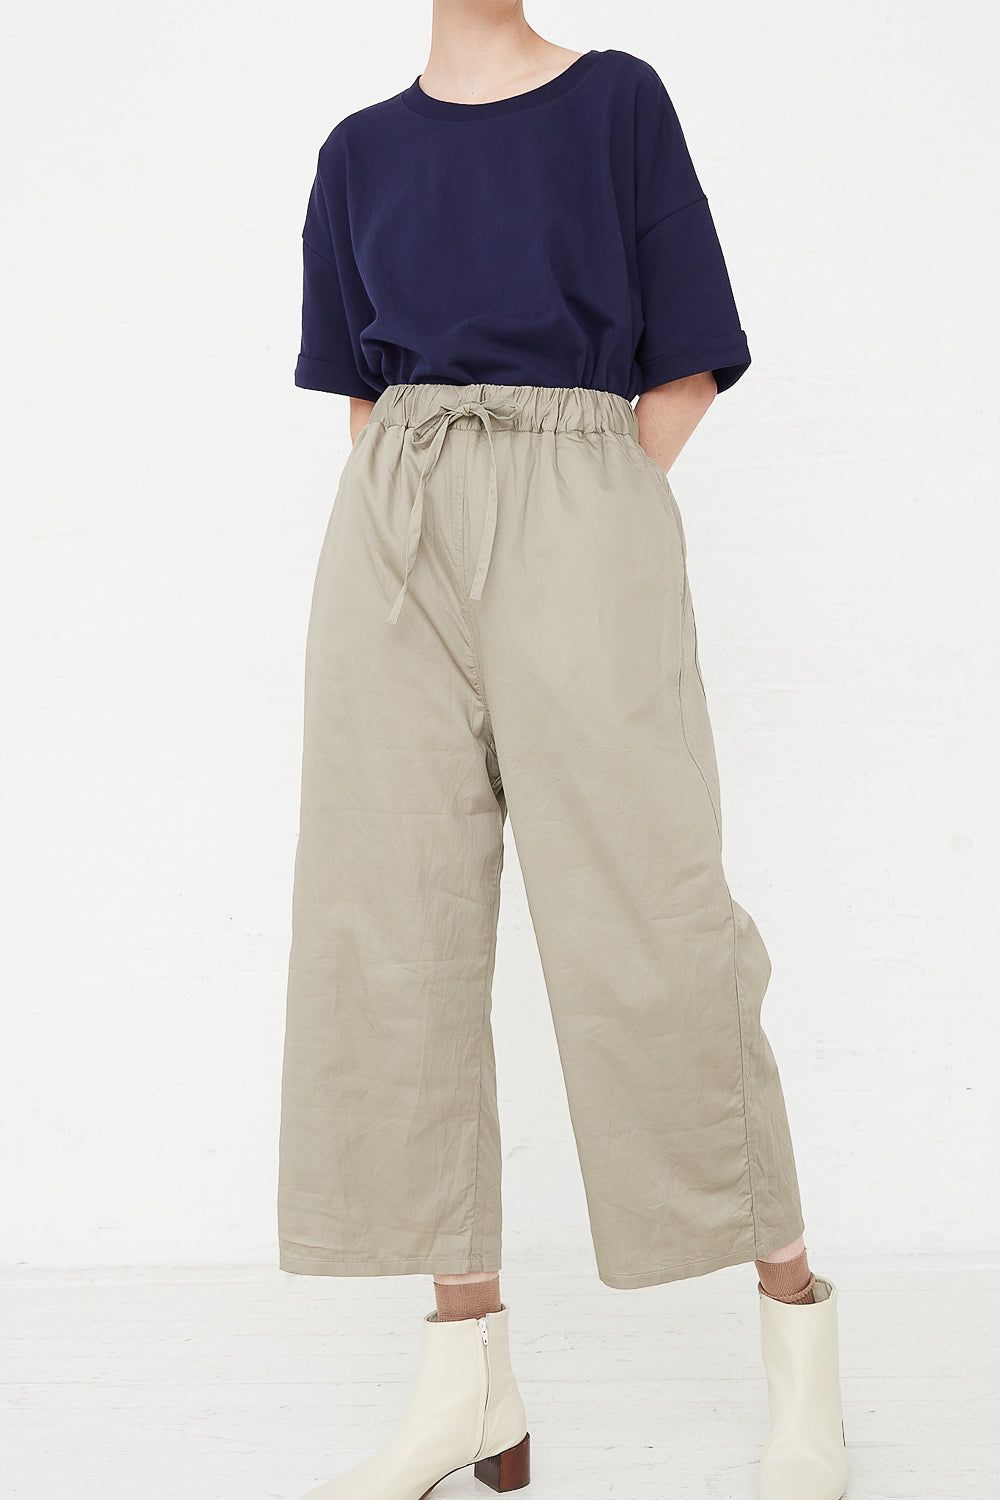 Ichi - Pant in Greige front view